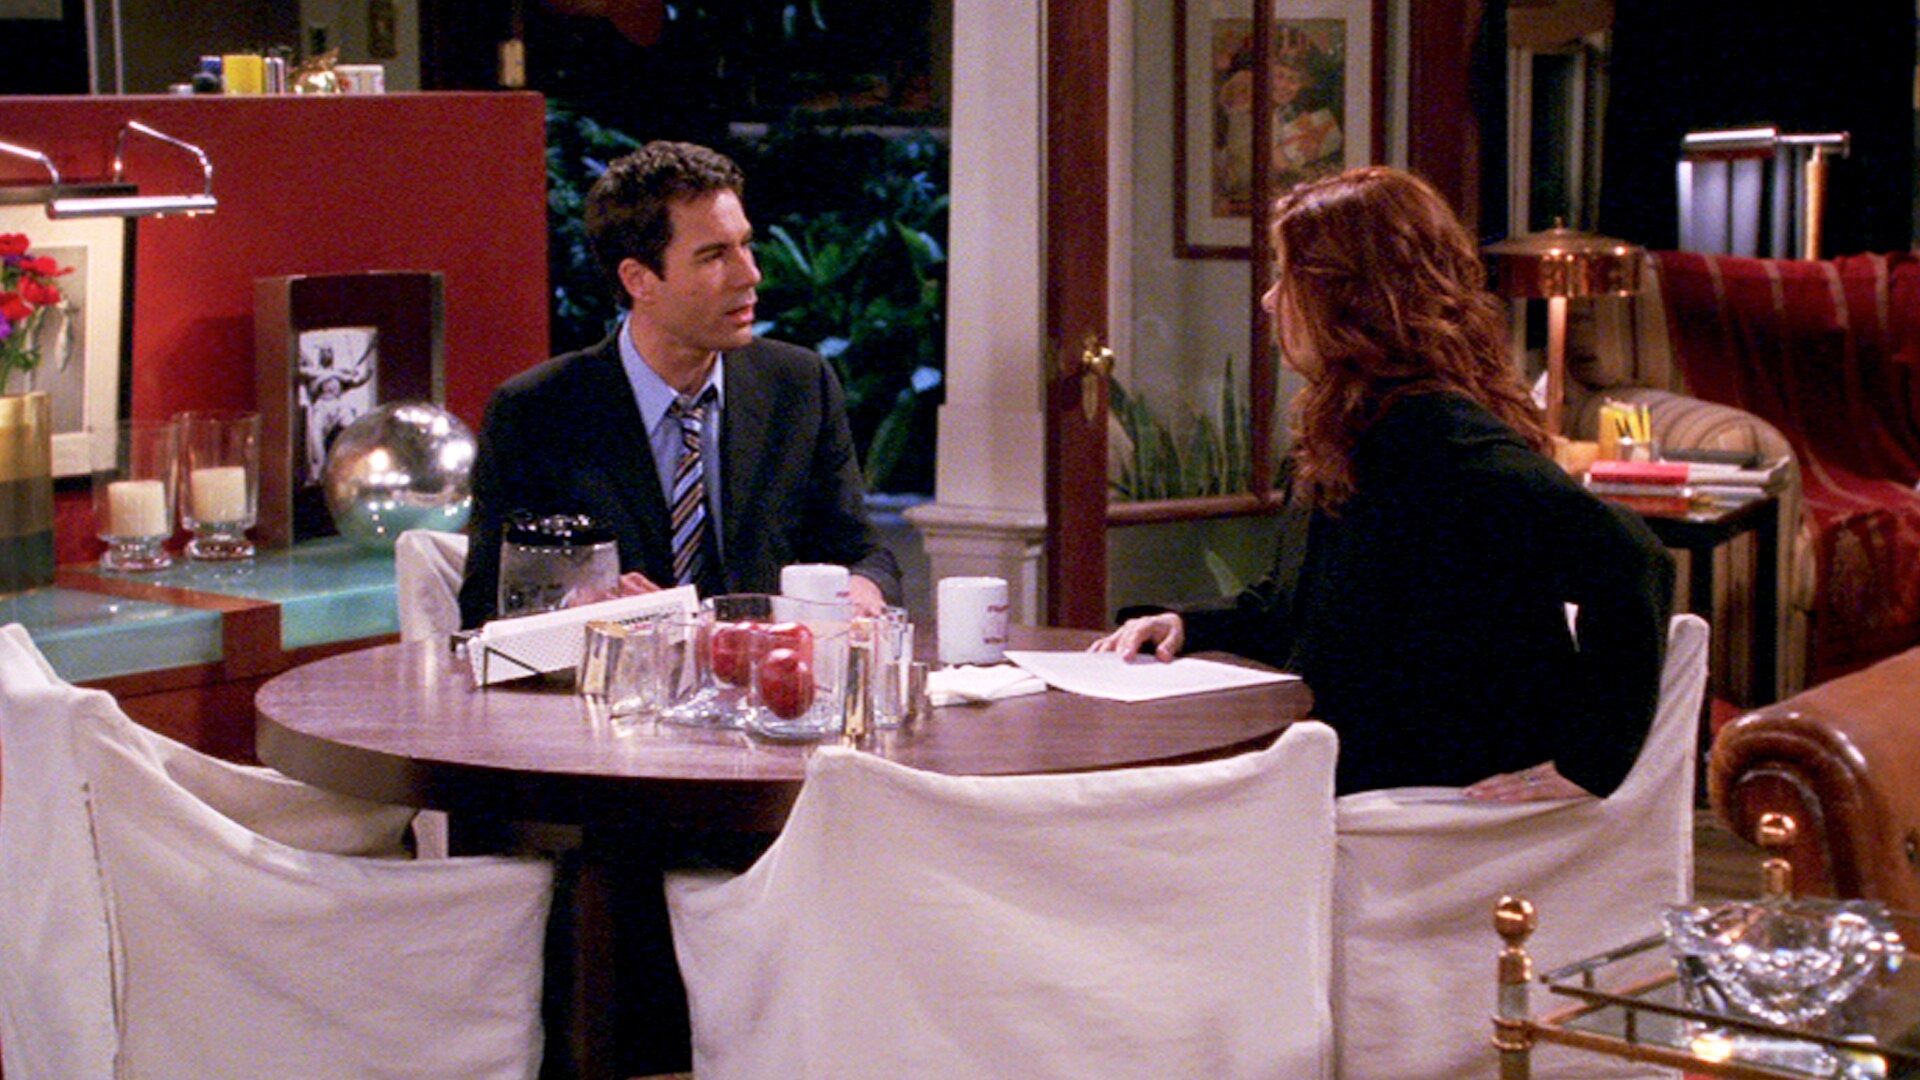 watch will and grace season 1 episode 15